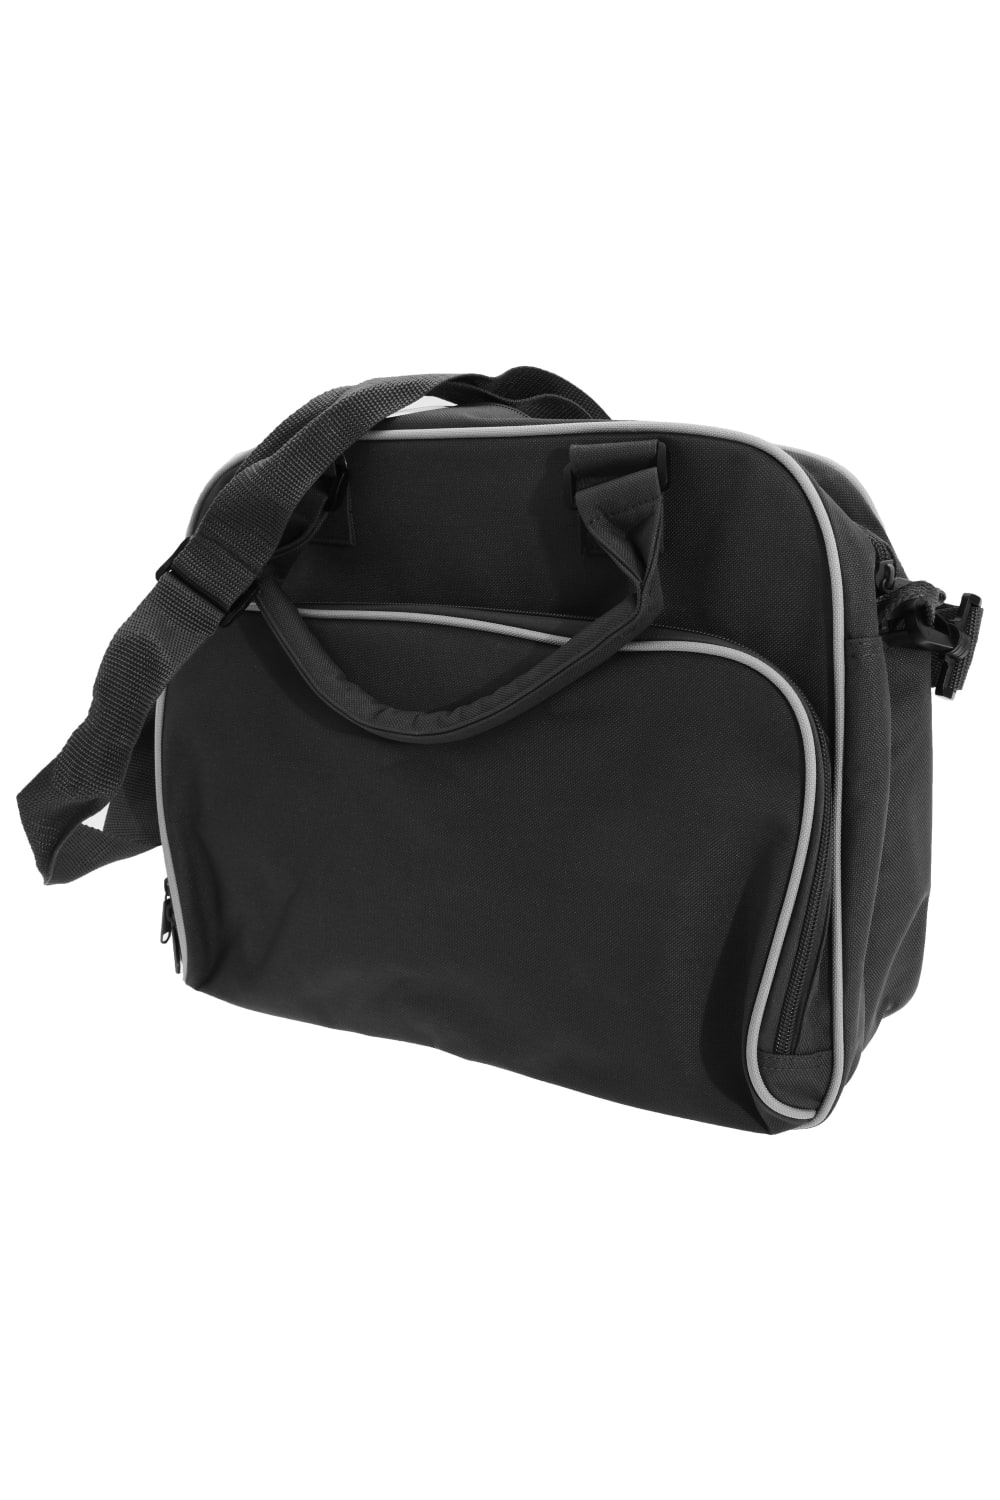 Bagbase Compact Junior Dance Messenger Bag (15 Liters) (Pack of 2) (Black/White) (One Size)